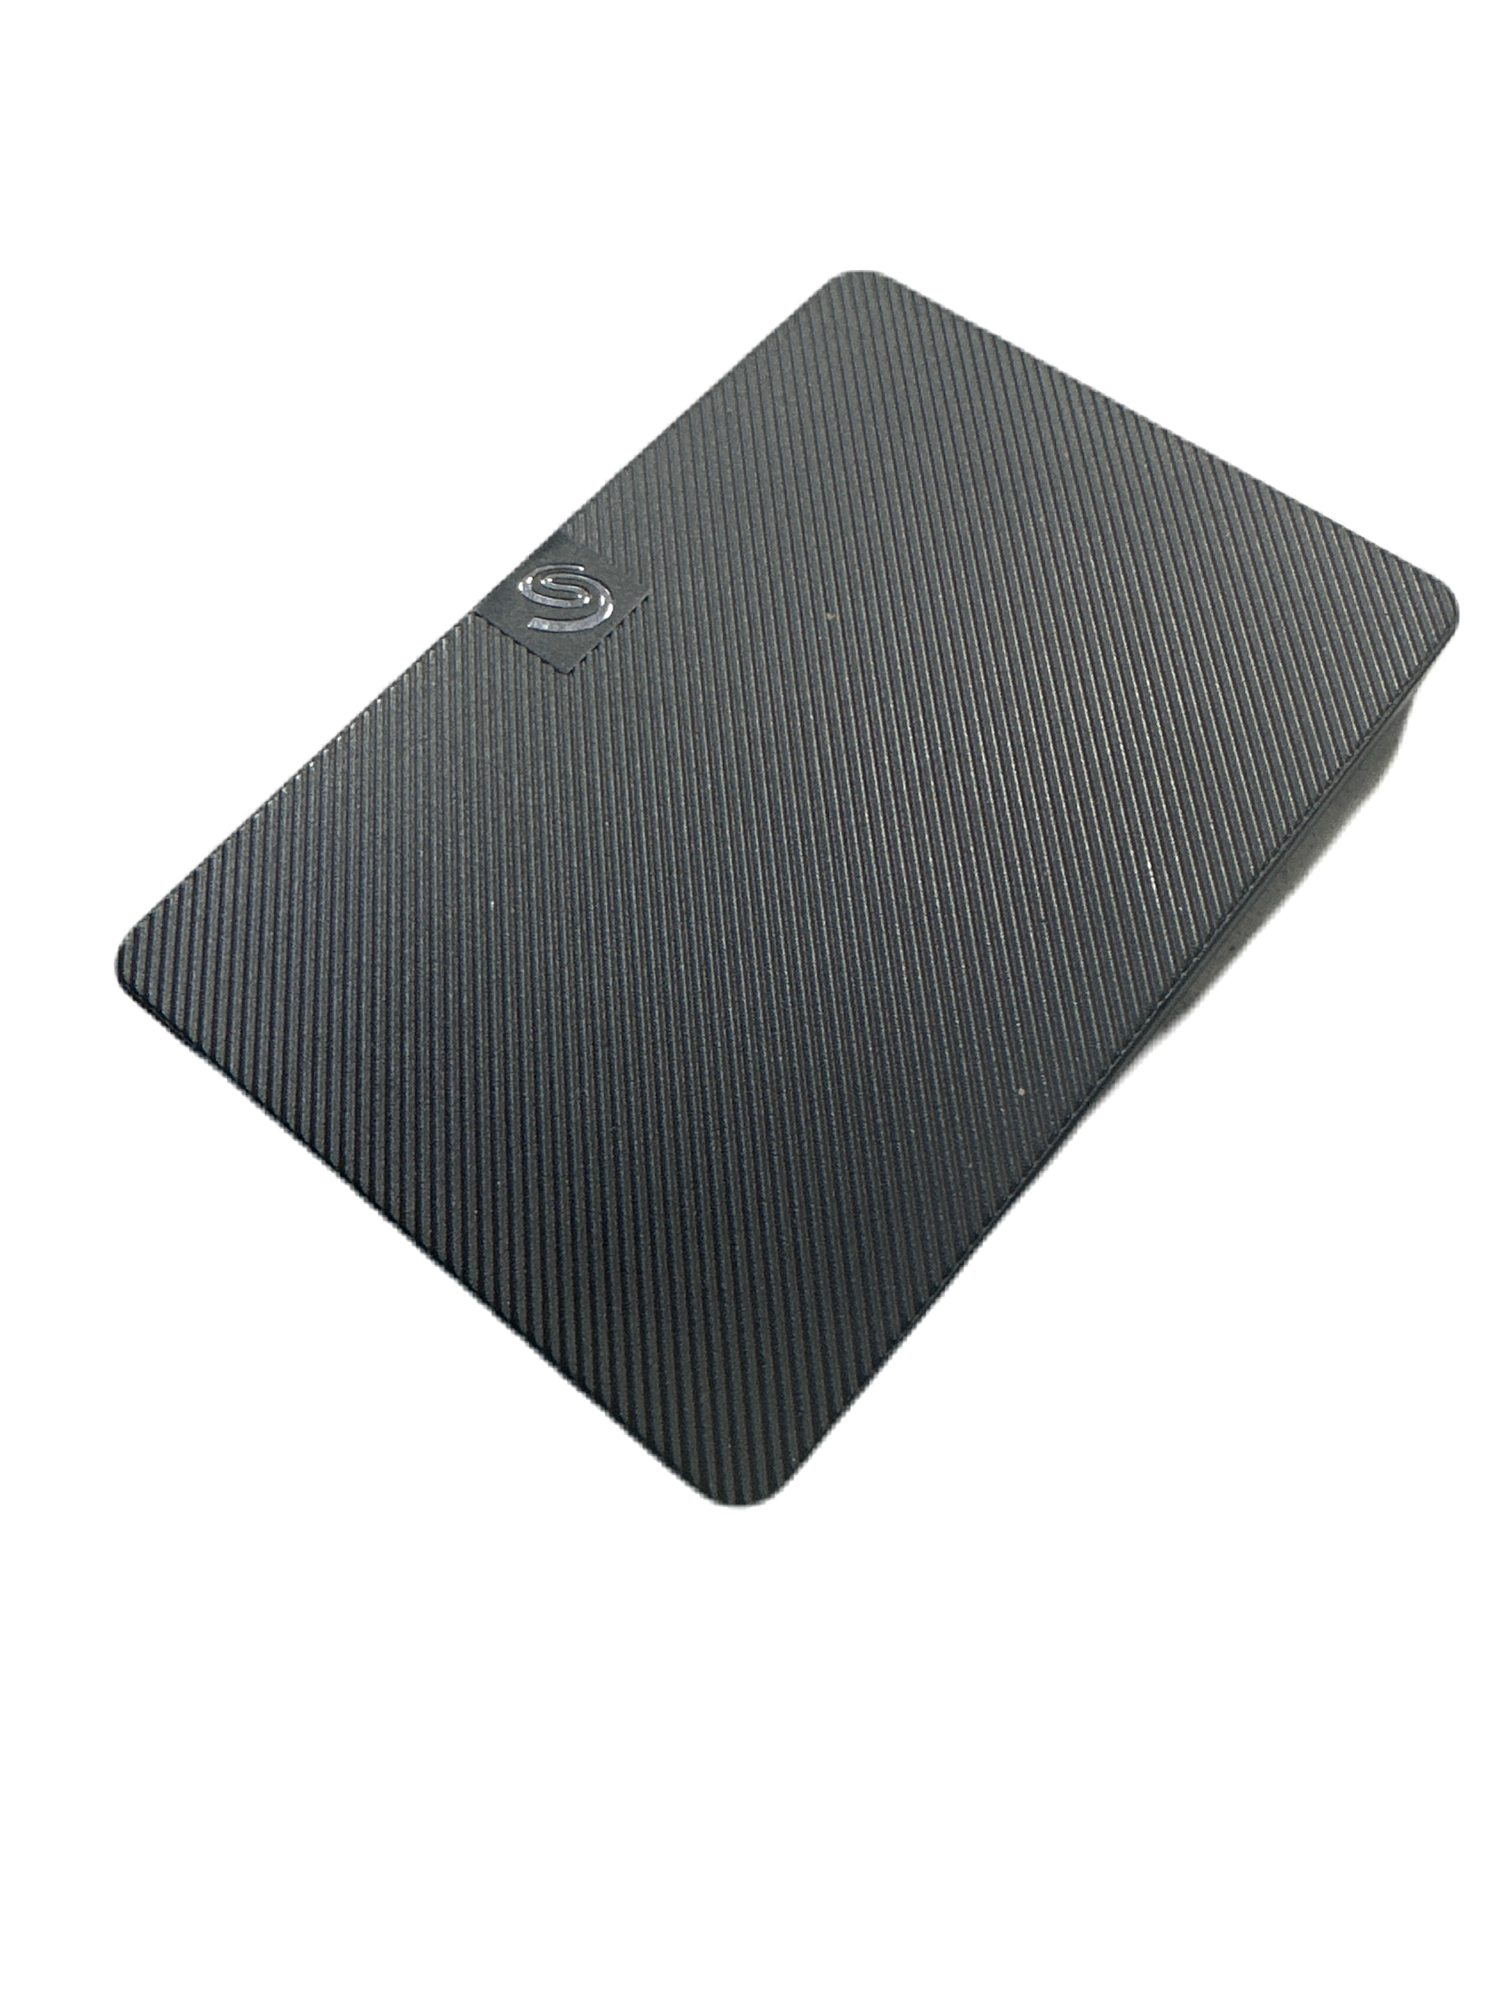 Seagate Expansion HDD - 1TB - with Wire